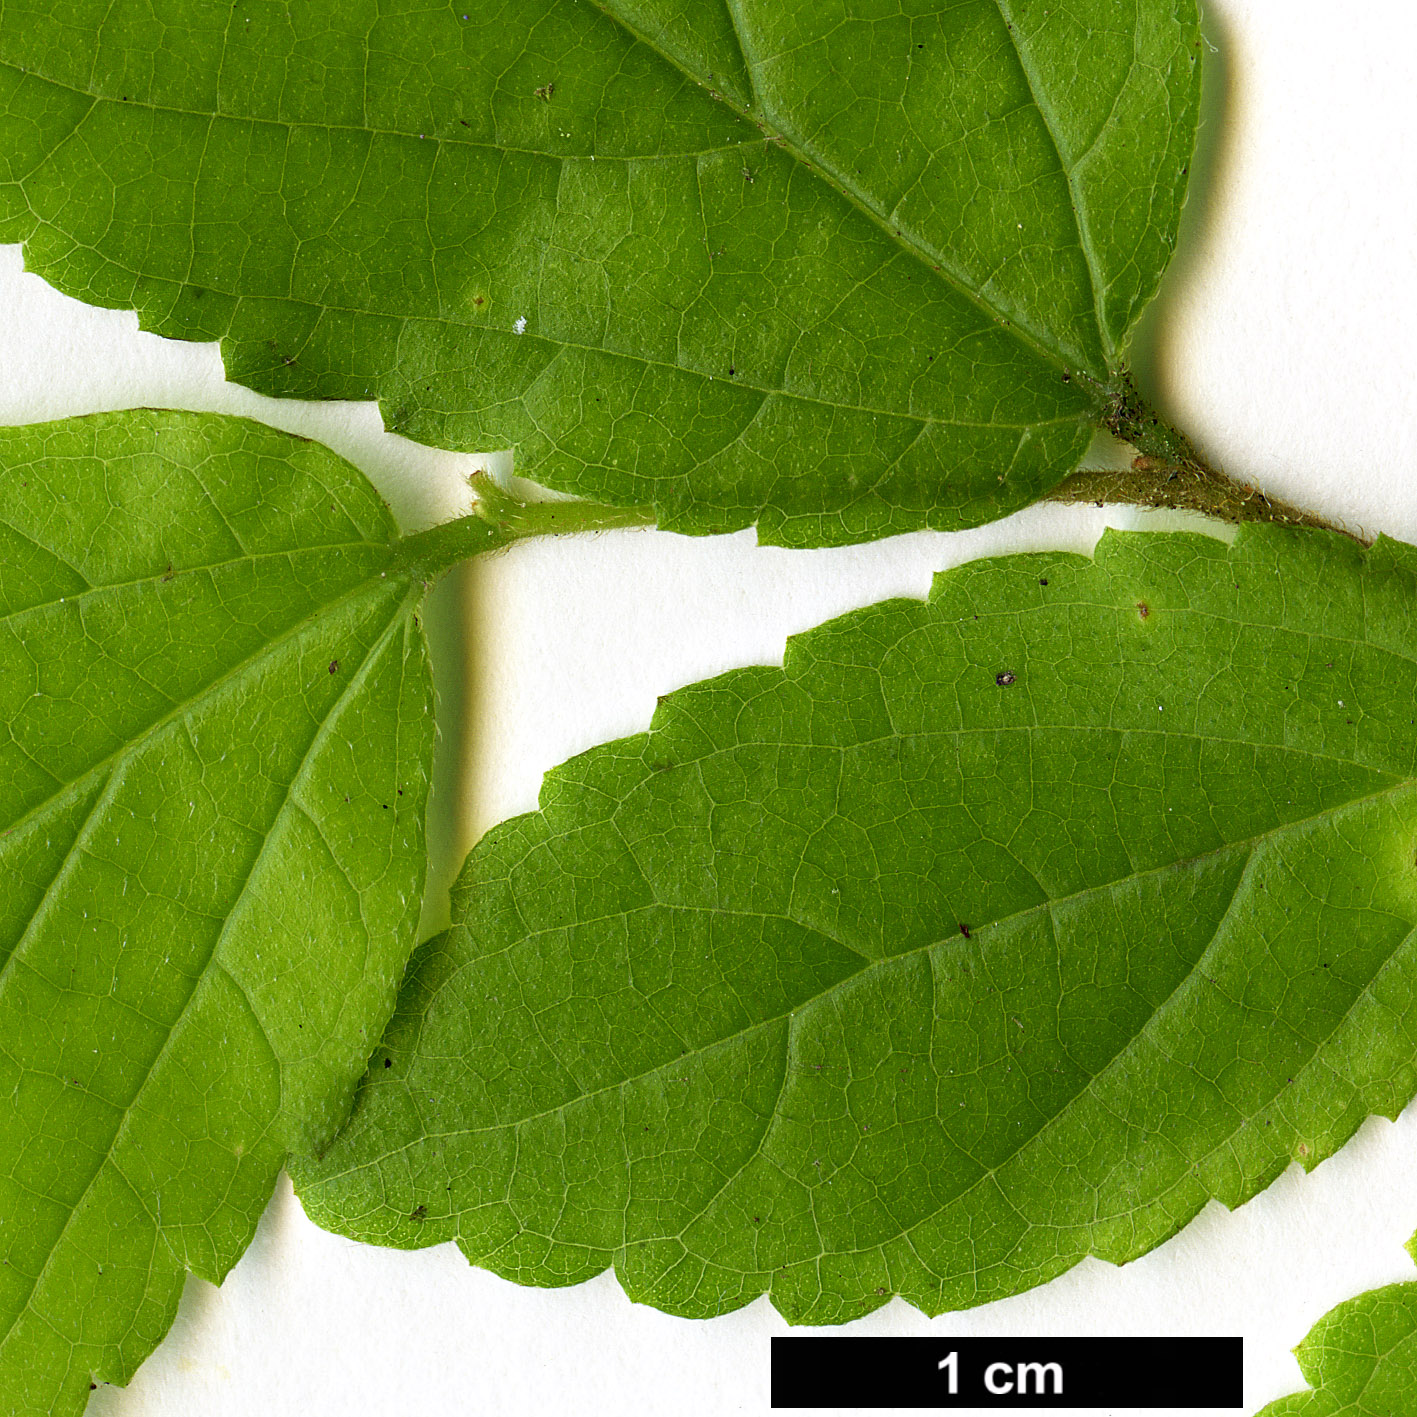 High resolution image: Family: Cannabaceae - Genus: Celtis - Taxon: africana